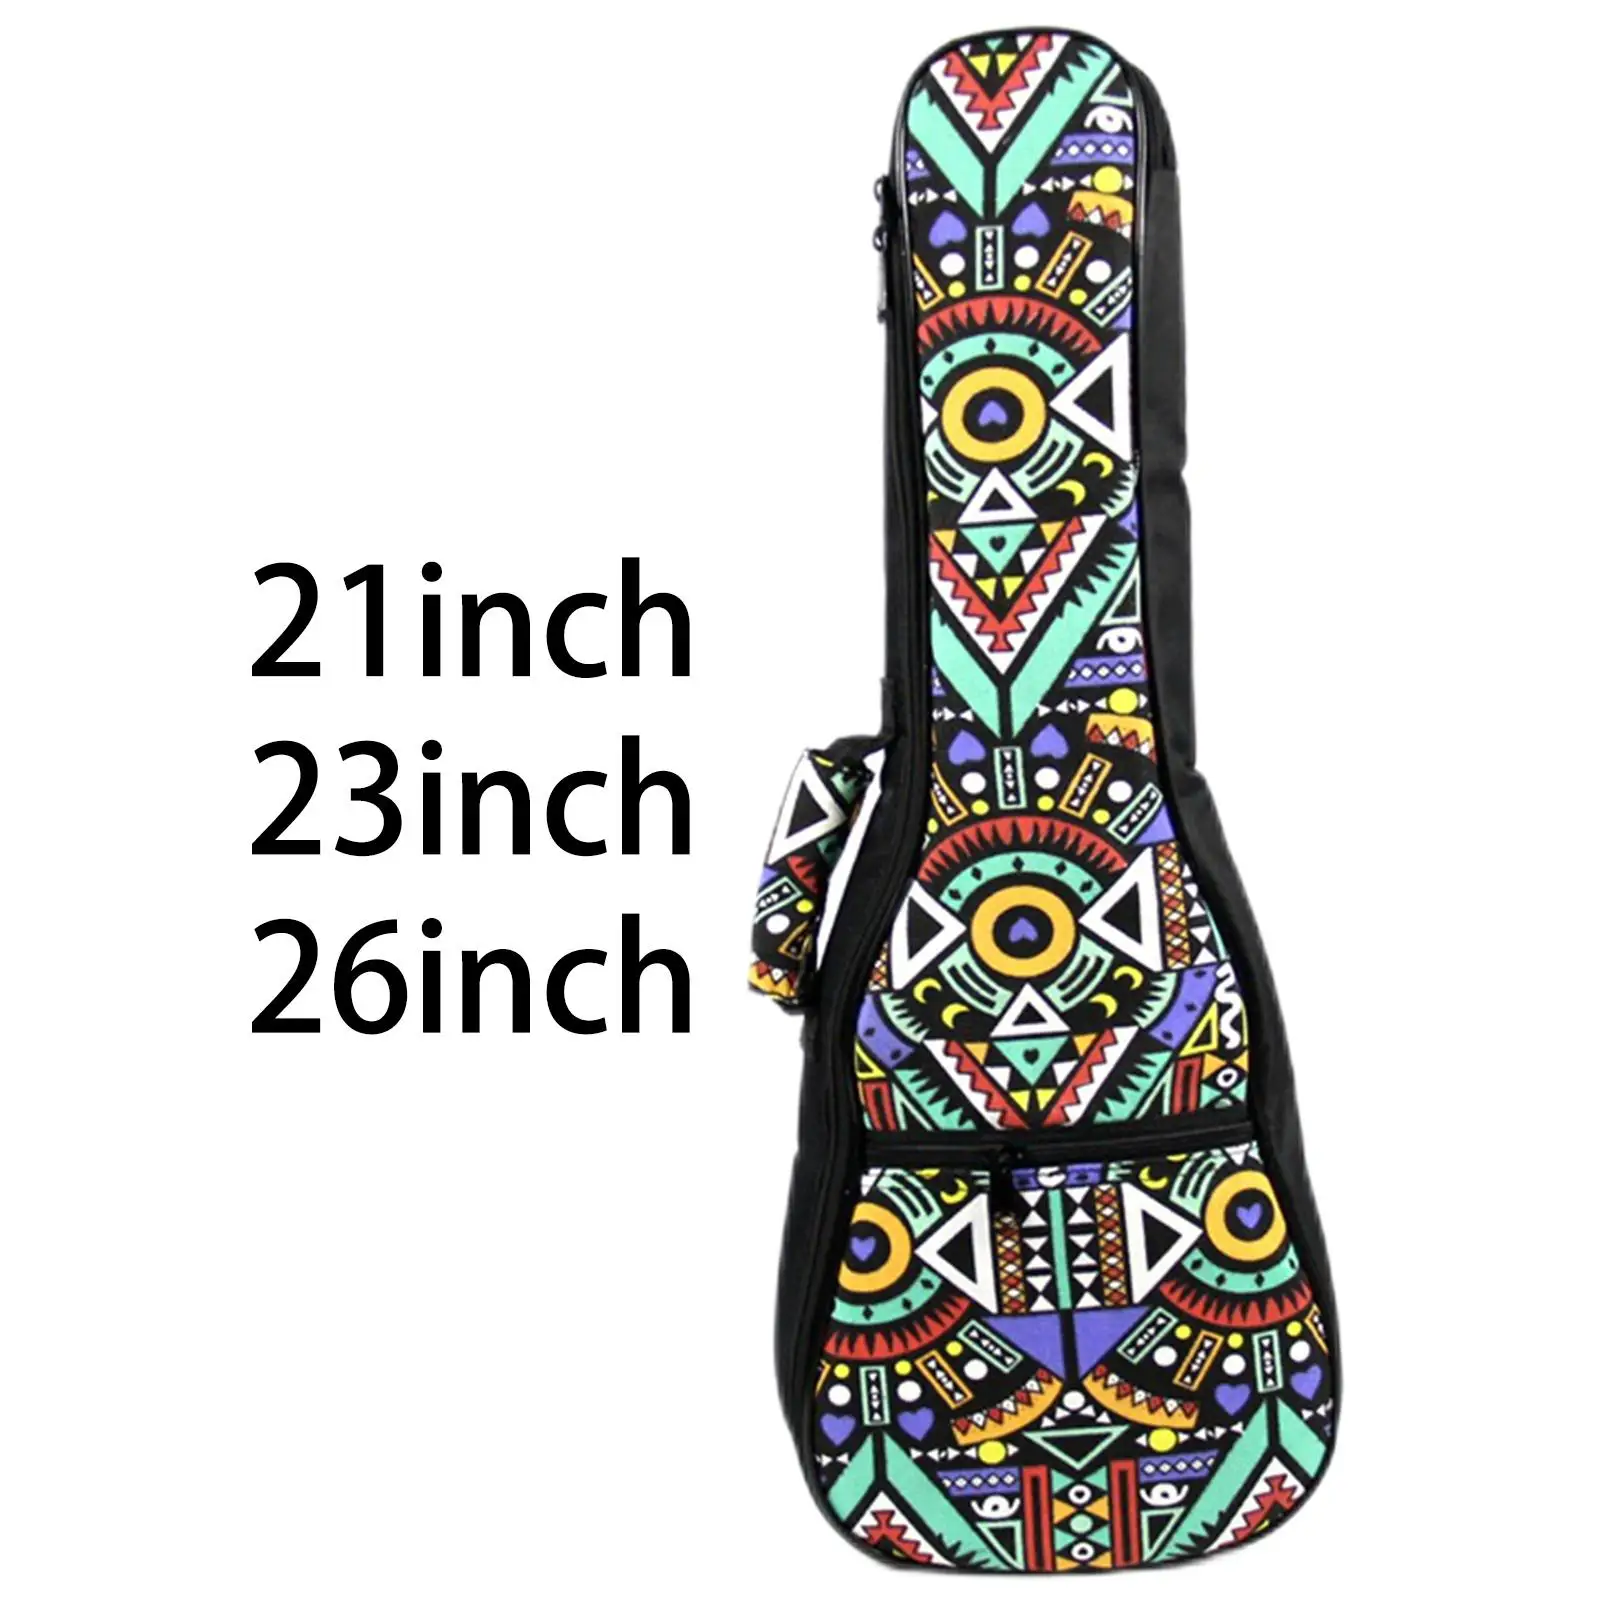 Ukulele Case Bag Padded Professional with Handle Thick with Adjustable Straps Soft for Concert Musical Instrument Accessories